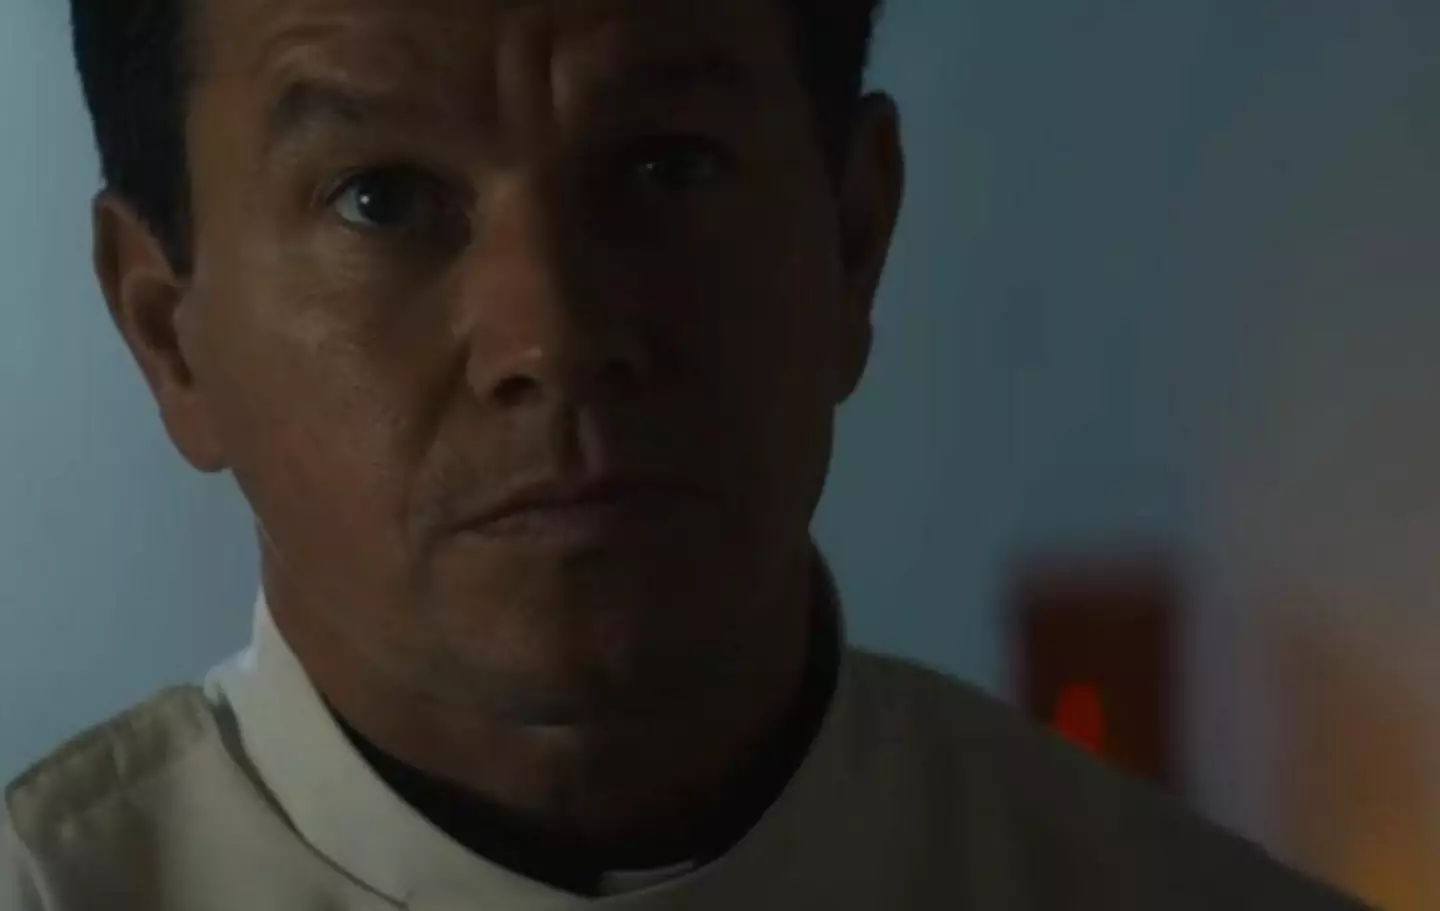 In the second official trailer, Stuart Long tells his mother he's going to become a priest, to which she responds: "For Halloween?".